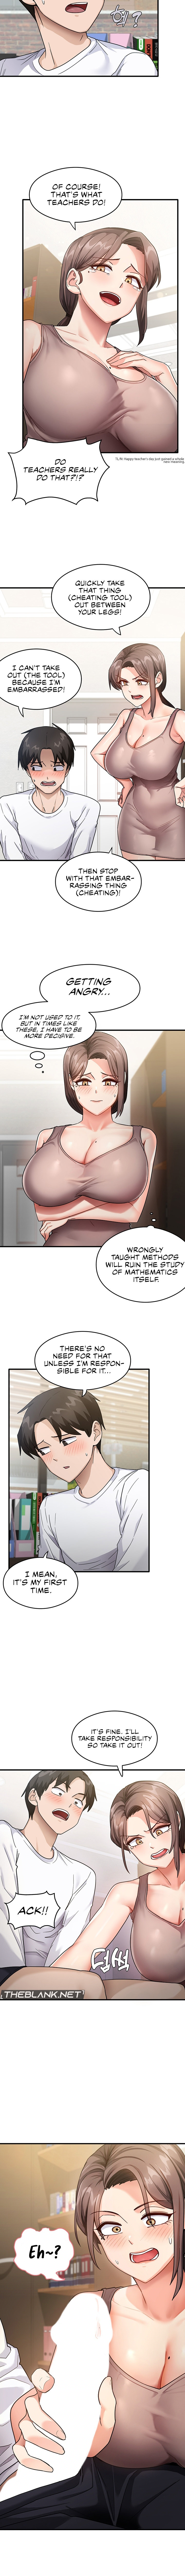 That Man’s Study Method - Chapter 1 Page 16